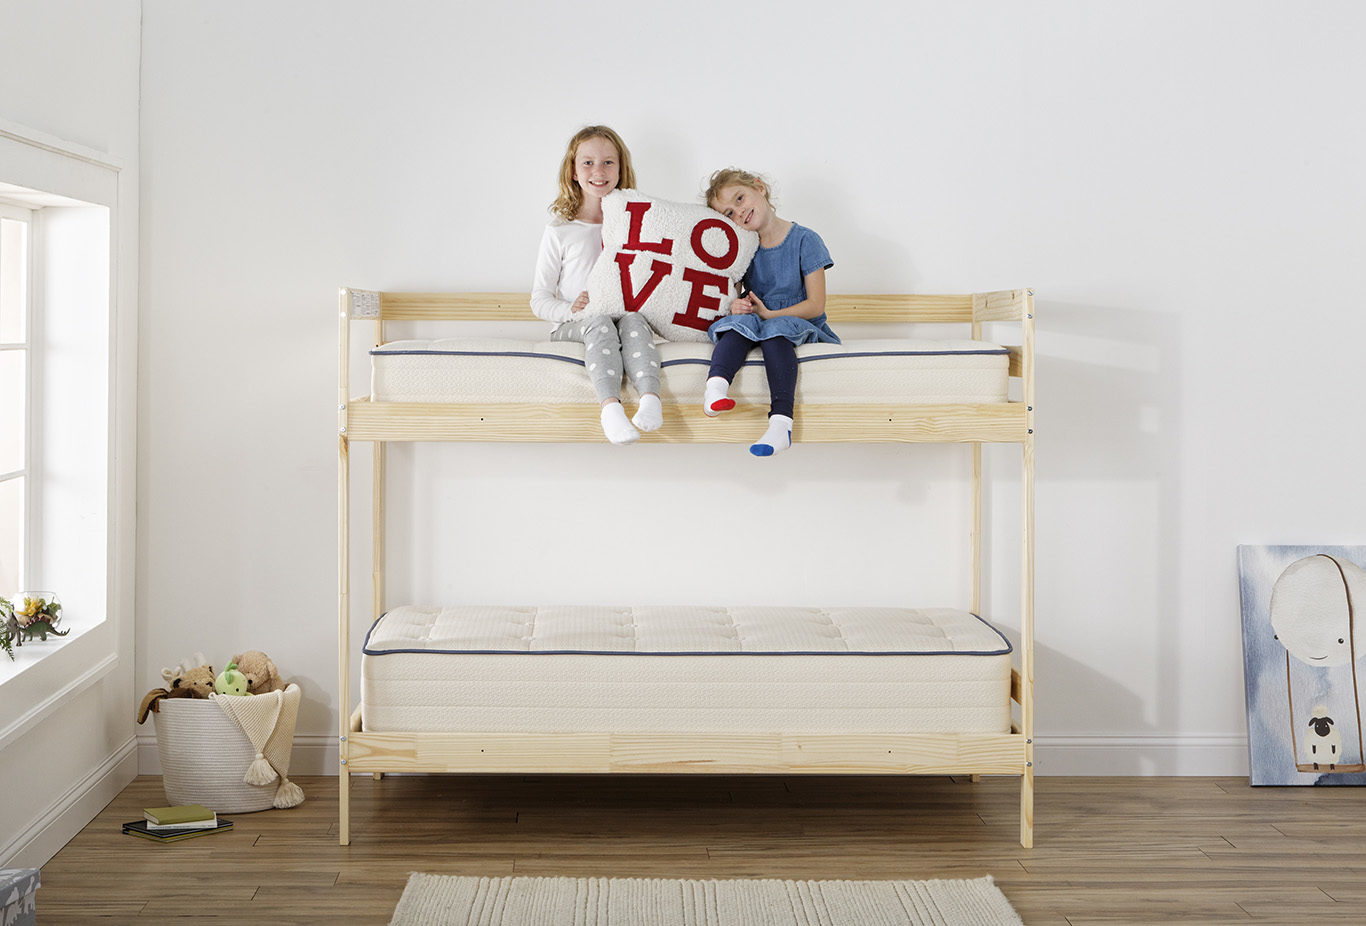 Kiwi Bunk Bed Mattresses, How Much Are Bunk Bed Mattresses